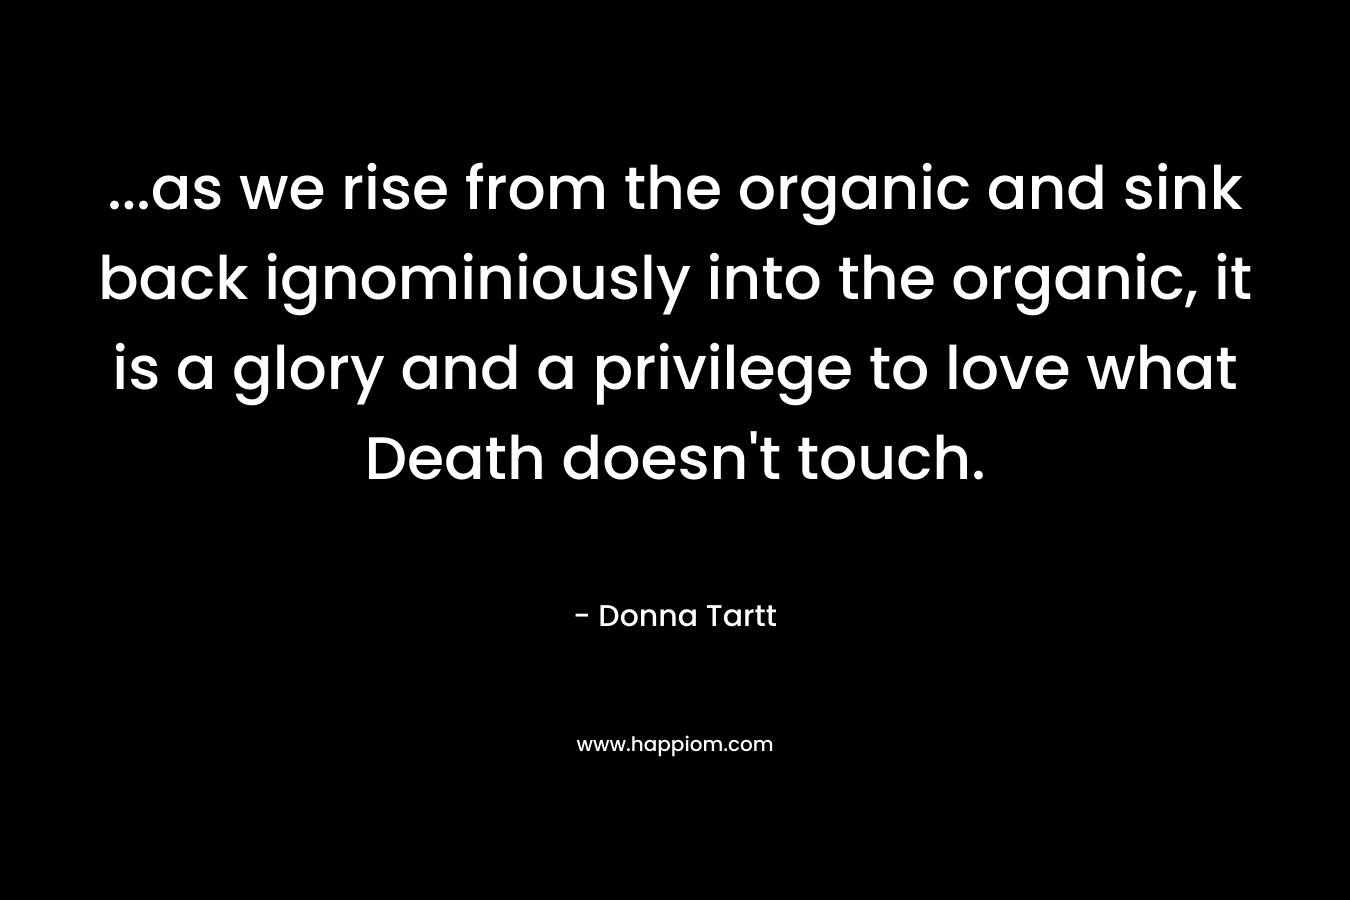 ...as we rise from the organic and sink back ignominiously into the organic, it is a glory and a privilege to love what Death doesn't touch.